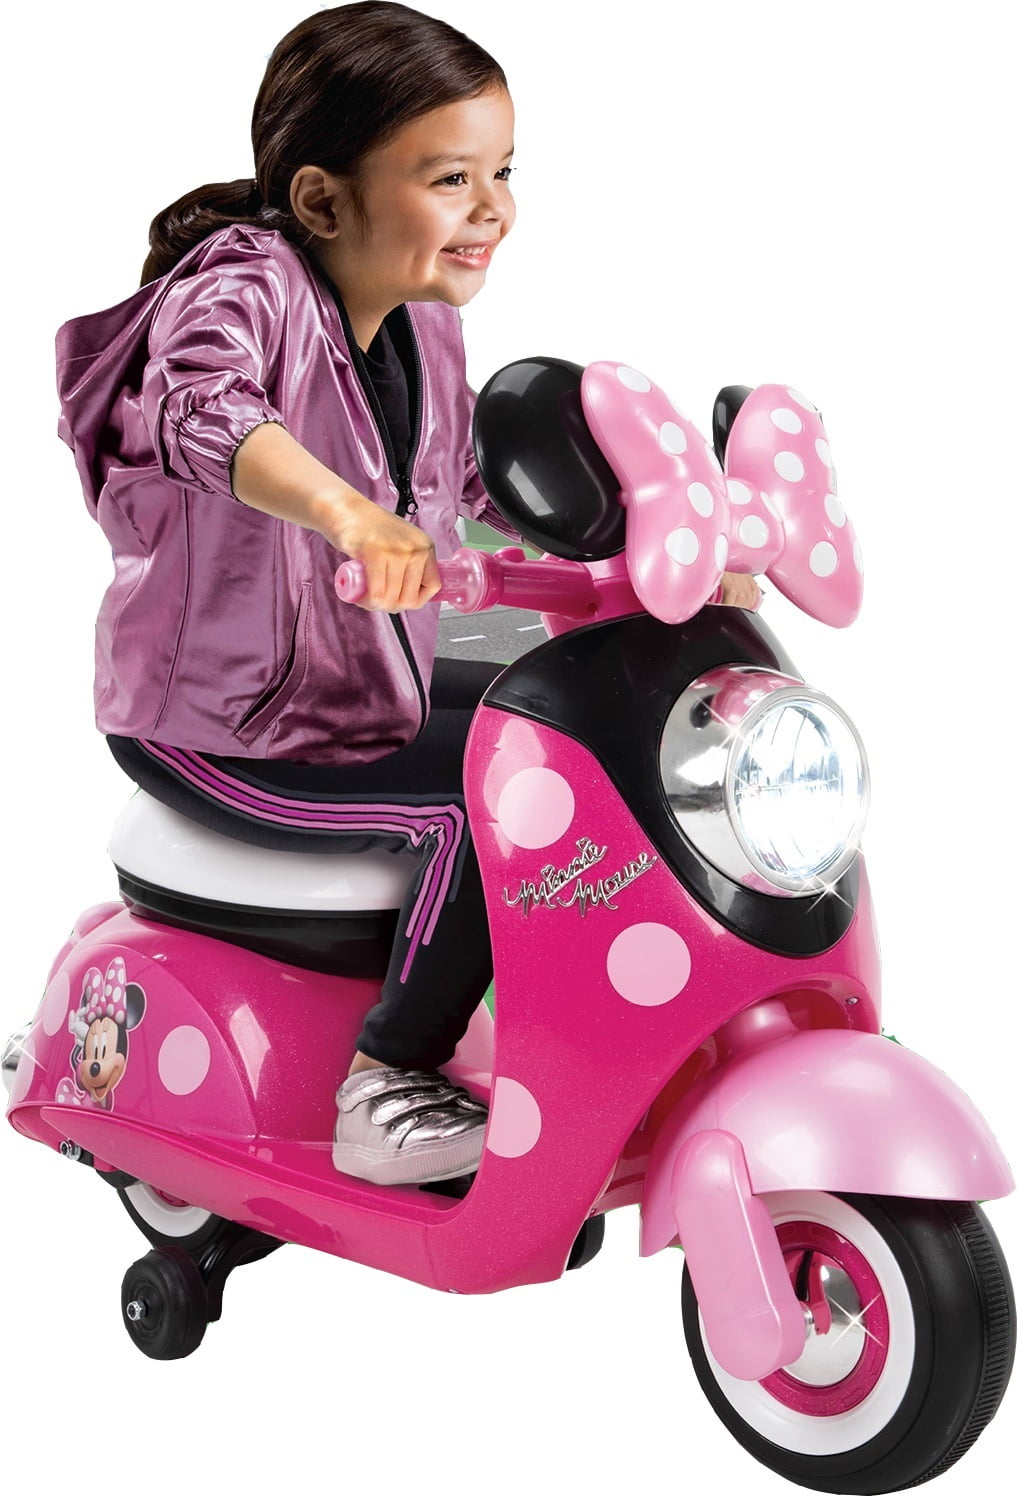 Minnie Mouse Scooter with Doll Sidecar 6-Volt Ride-On Toy Car for Girls Kids New 